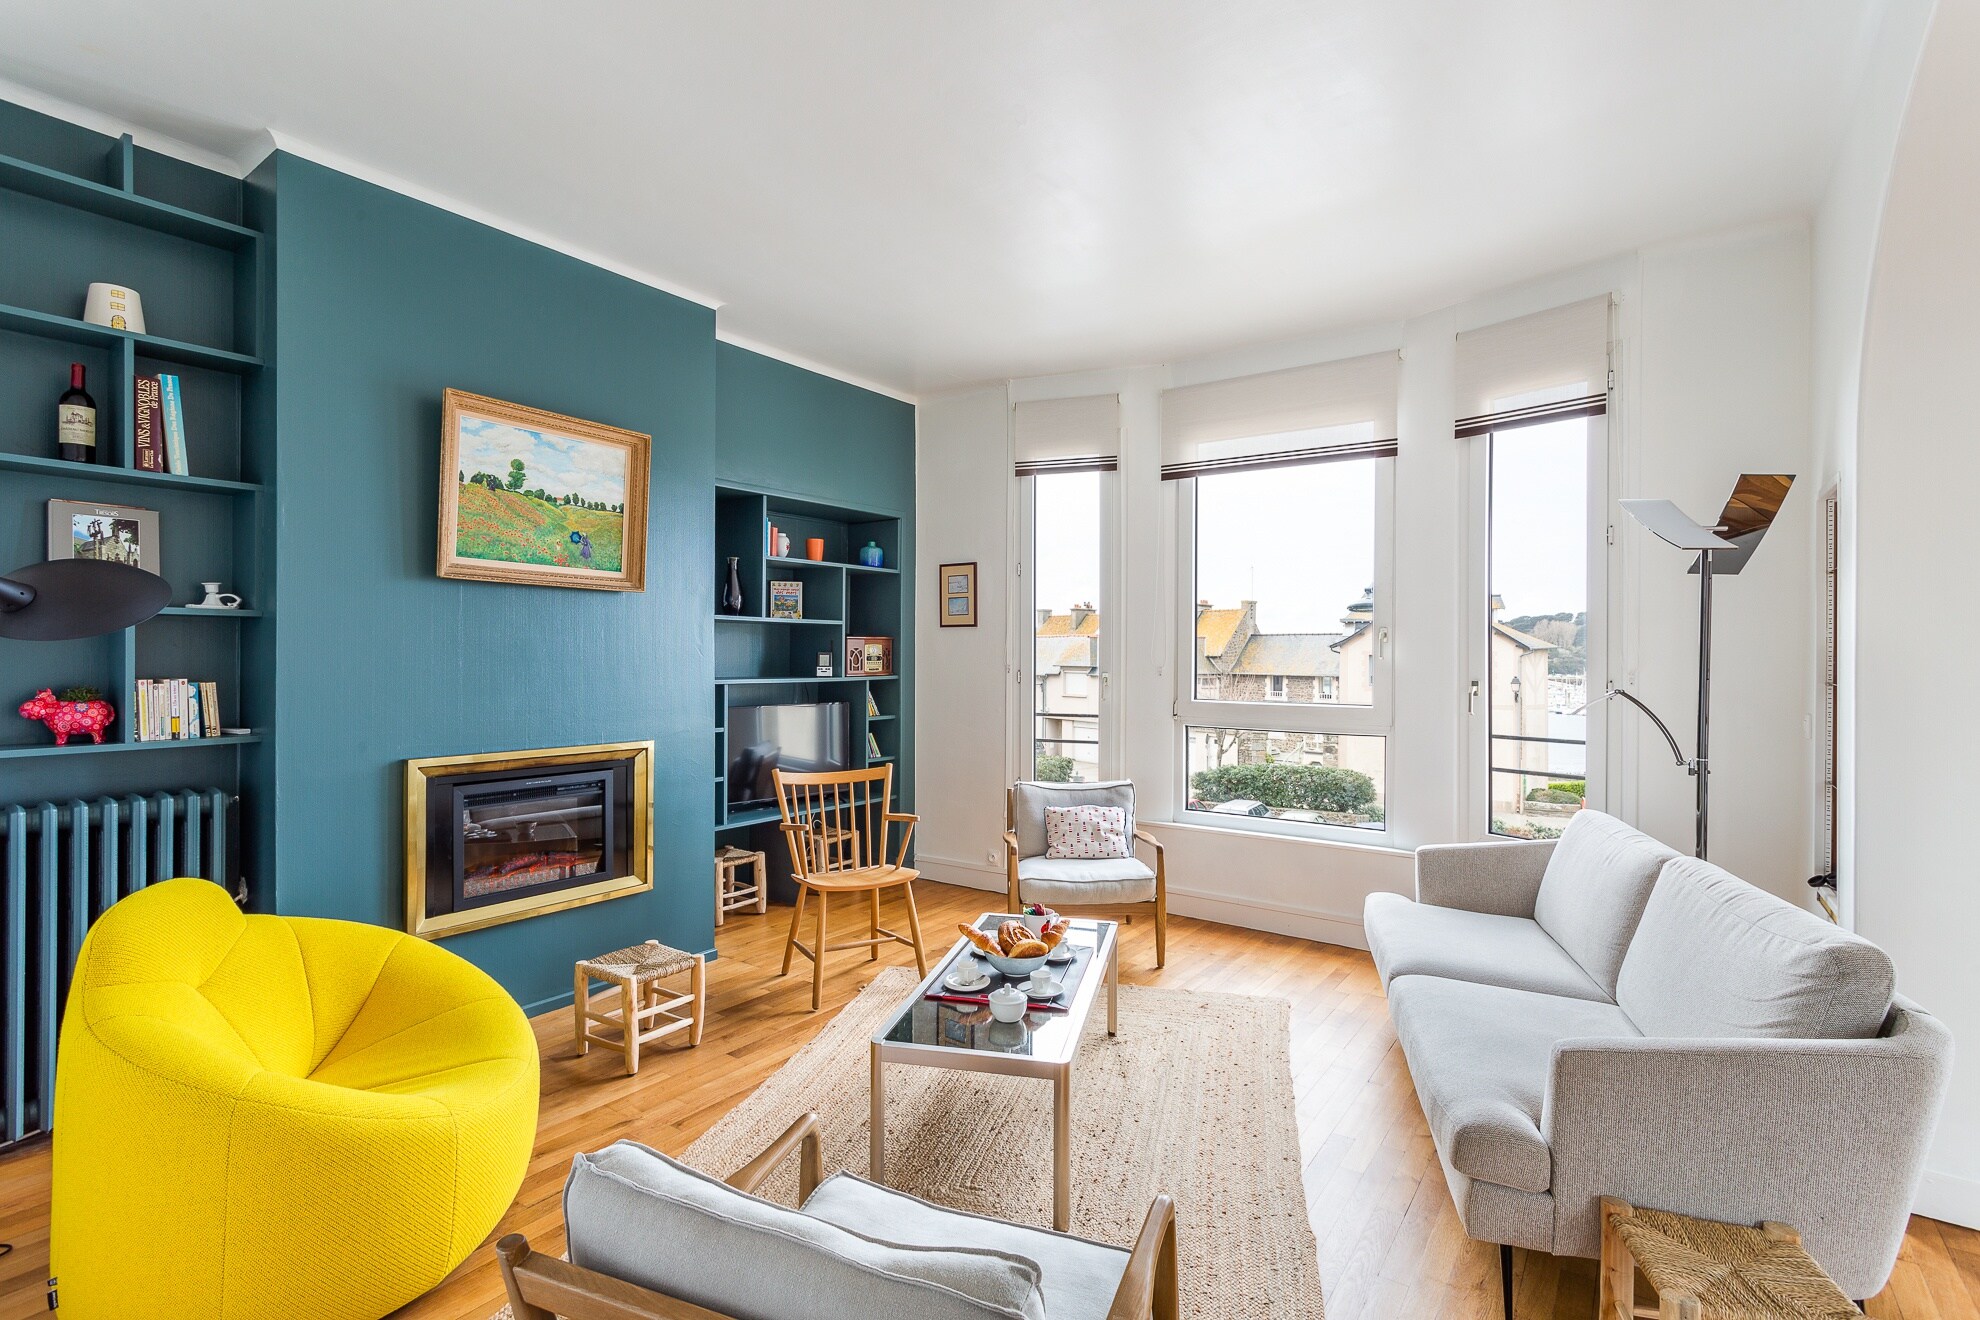 Property Image 1 - Bright and airy three bedroom flat in Saint-Malo